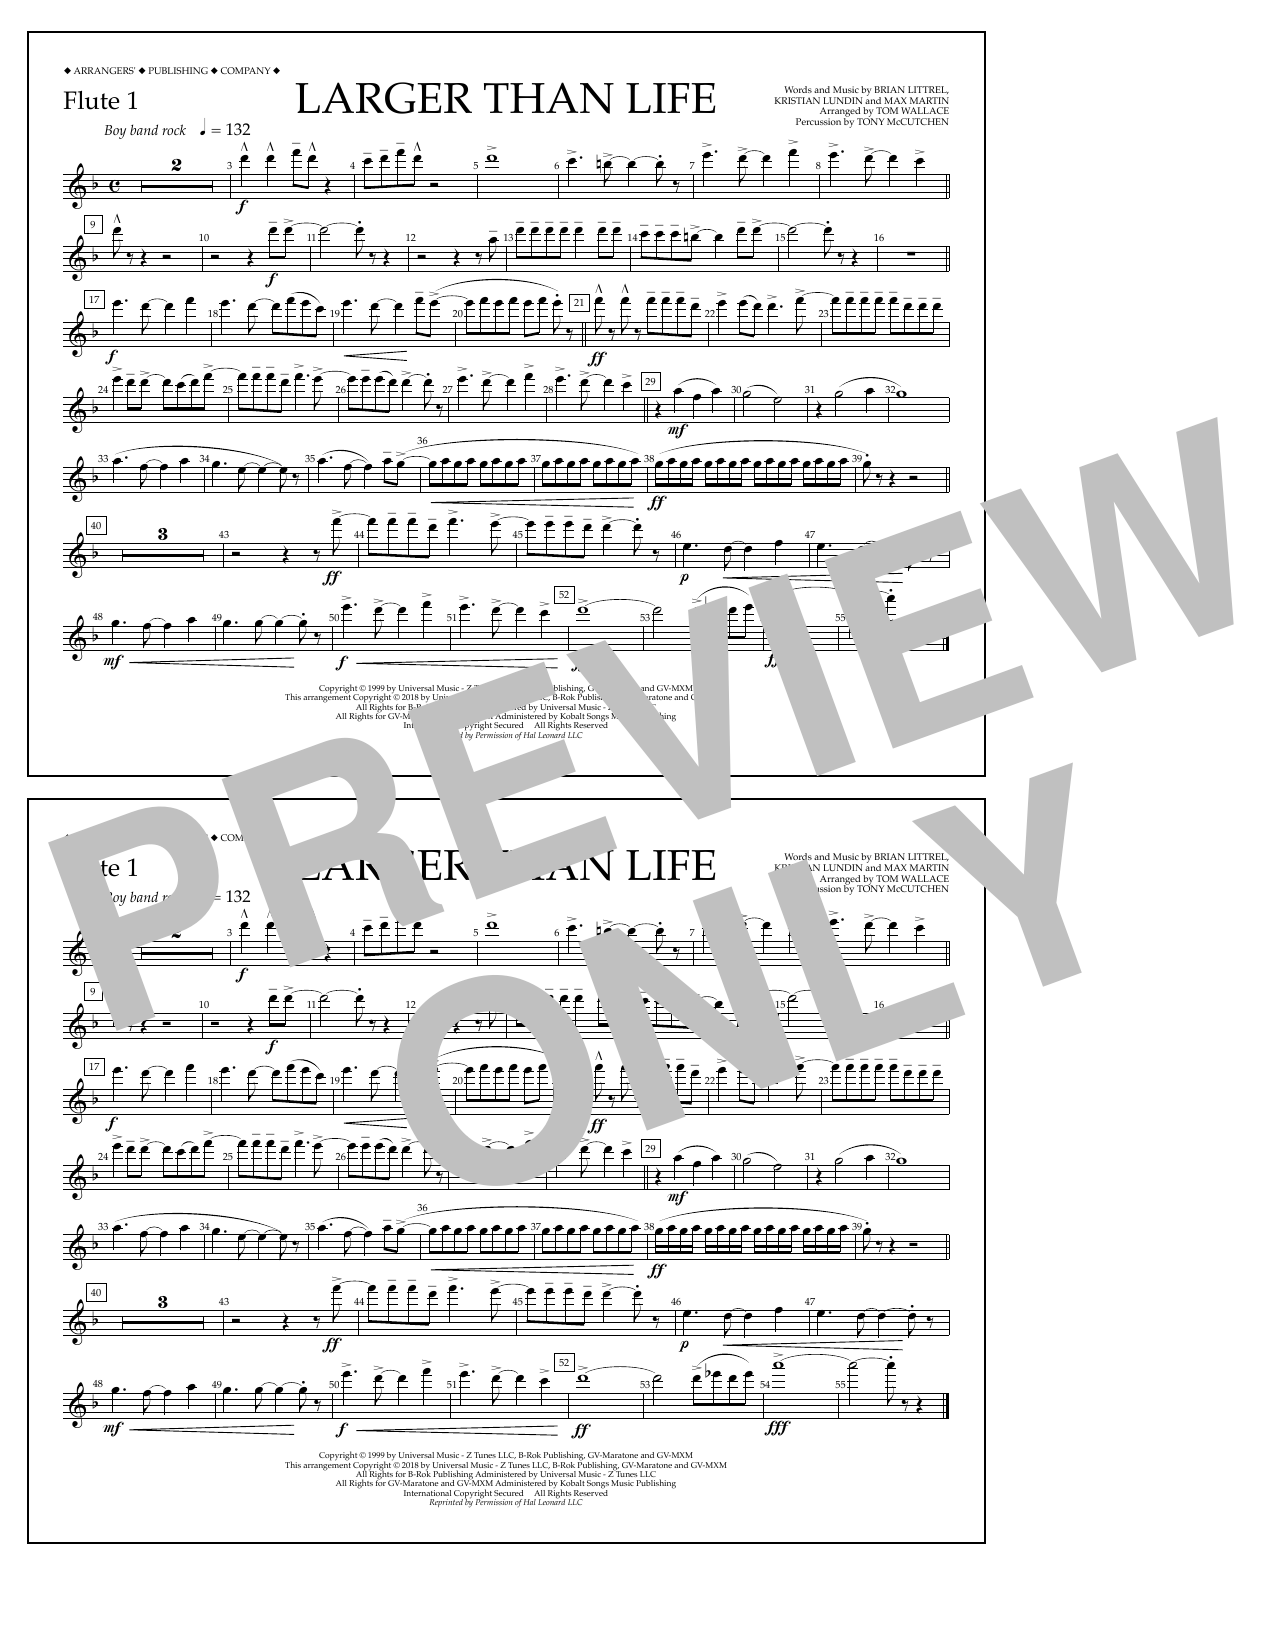 Download Tom Wallace Larger Than Life - Flute 1 Sheet Music